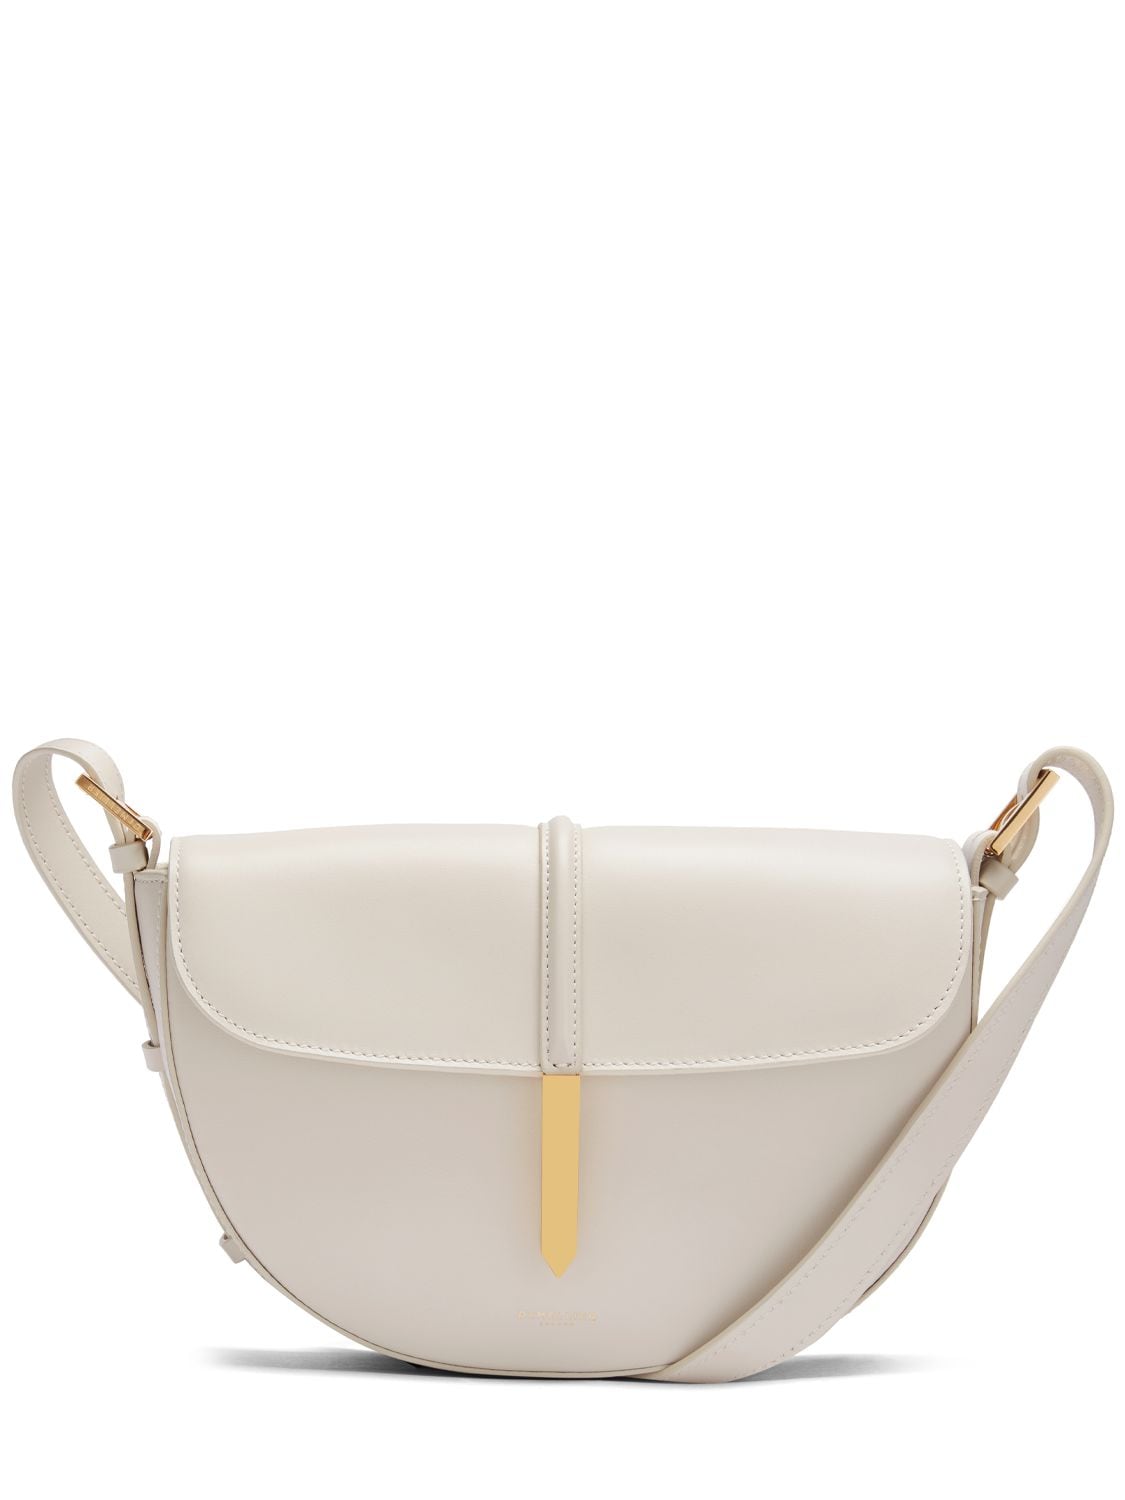 Demellier Tokyo Saddle Smooth Leather Bag In Wollweiss